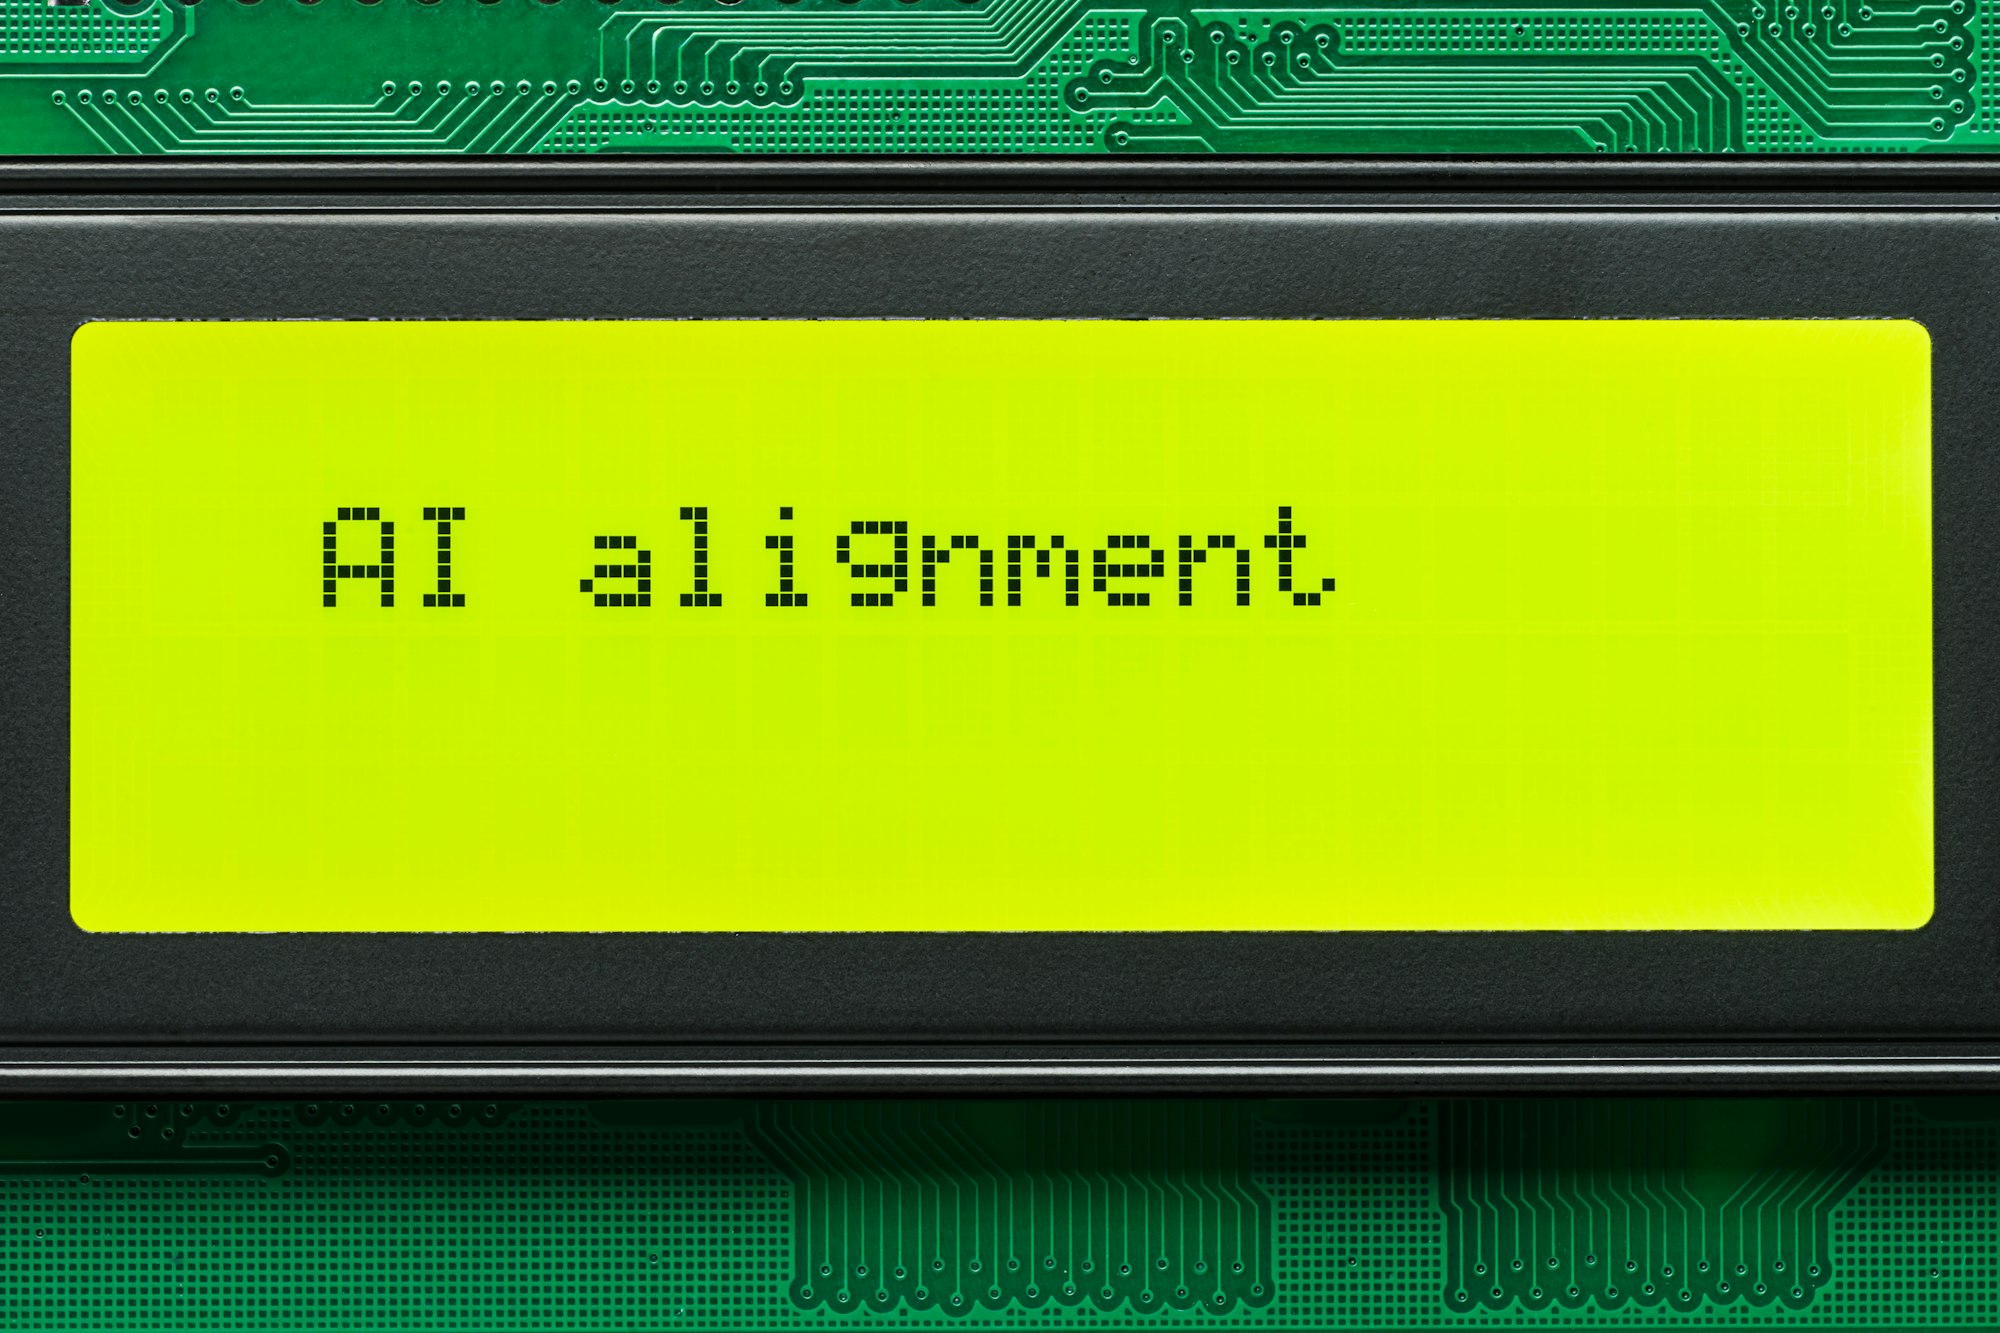 AI alignment text on the green monochrome character display.